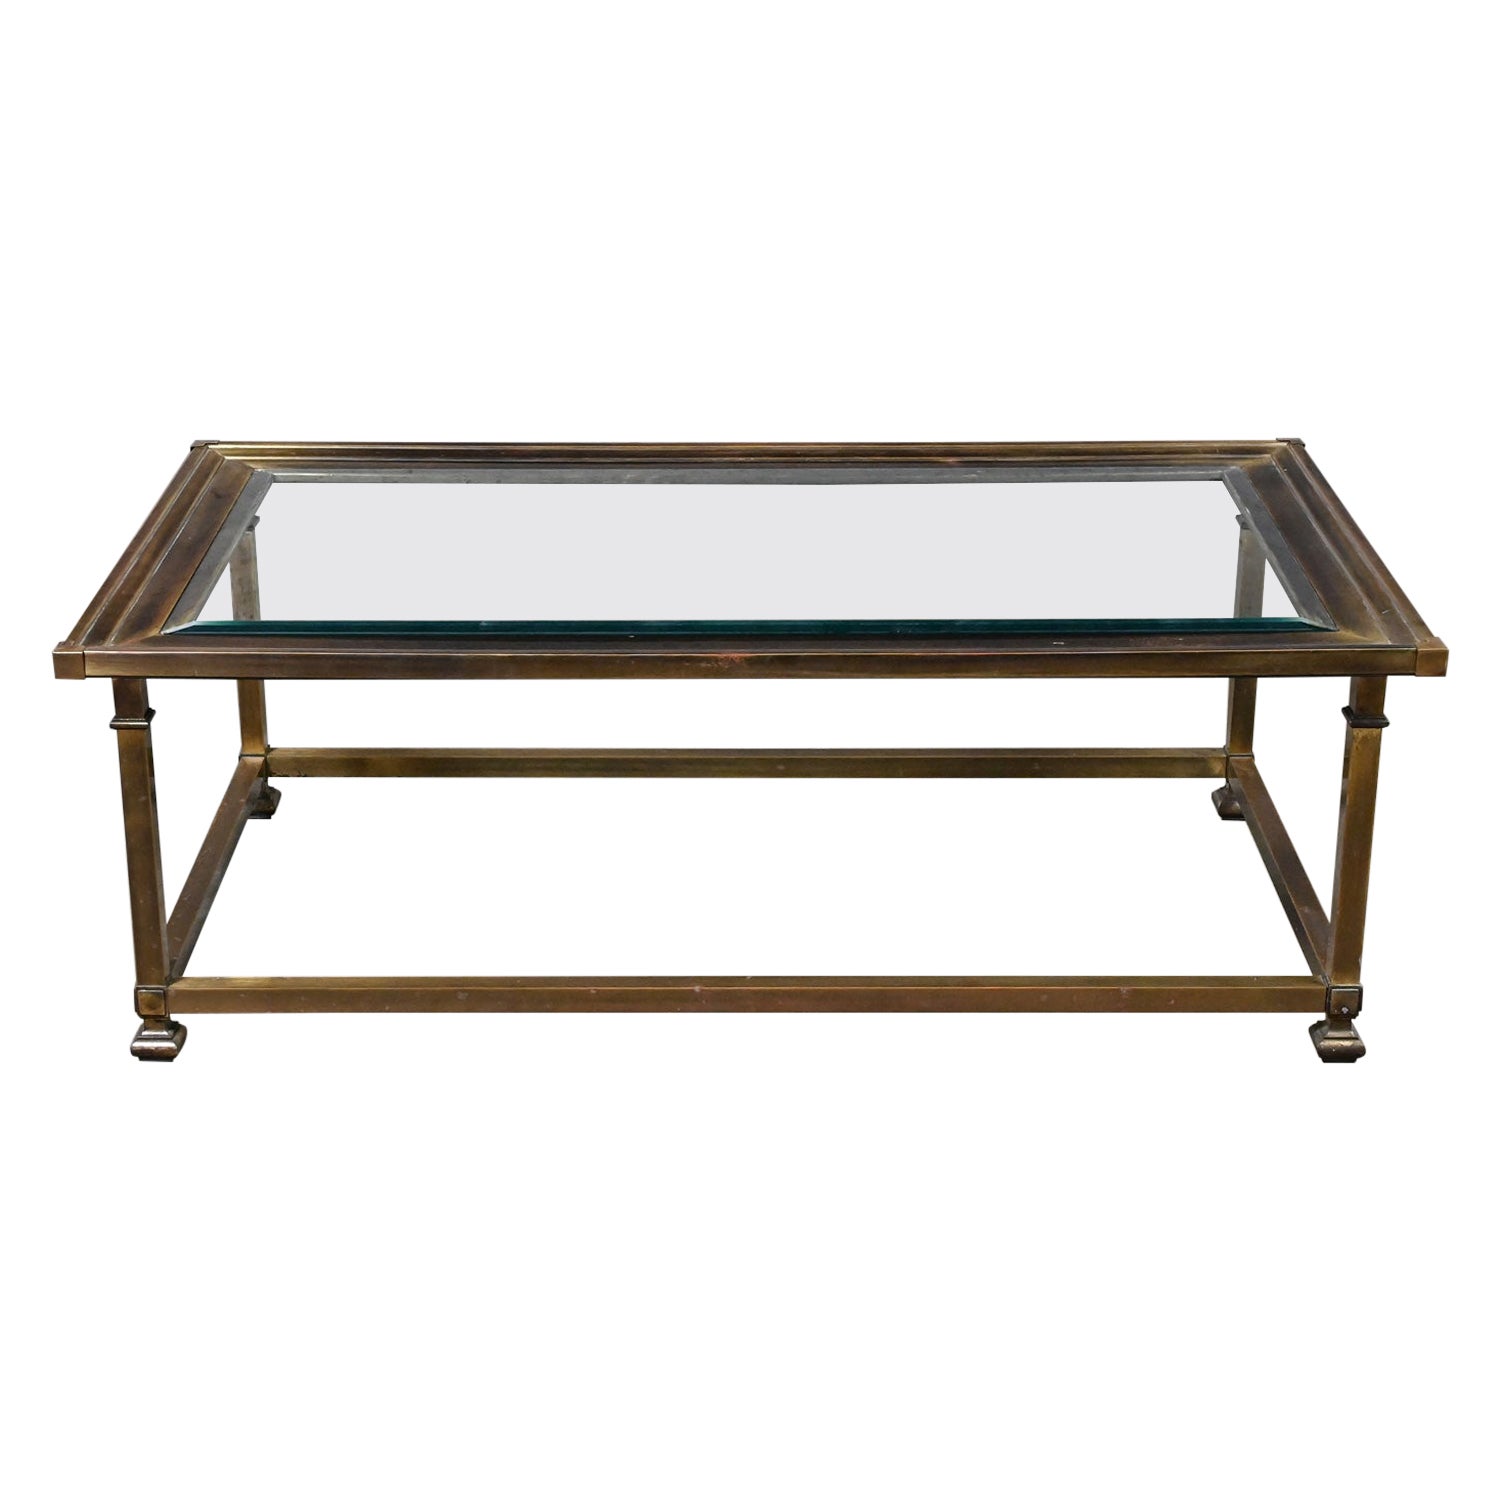 Late 20th Century Coffee Table Style Mastercraft Rectangular Antique Brass Frame For Sale